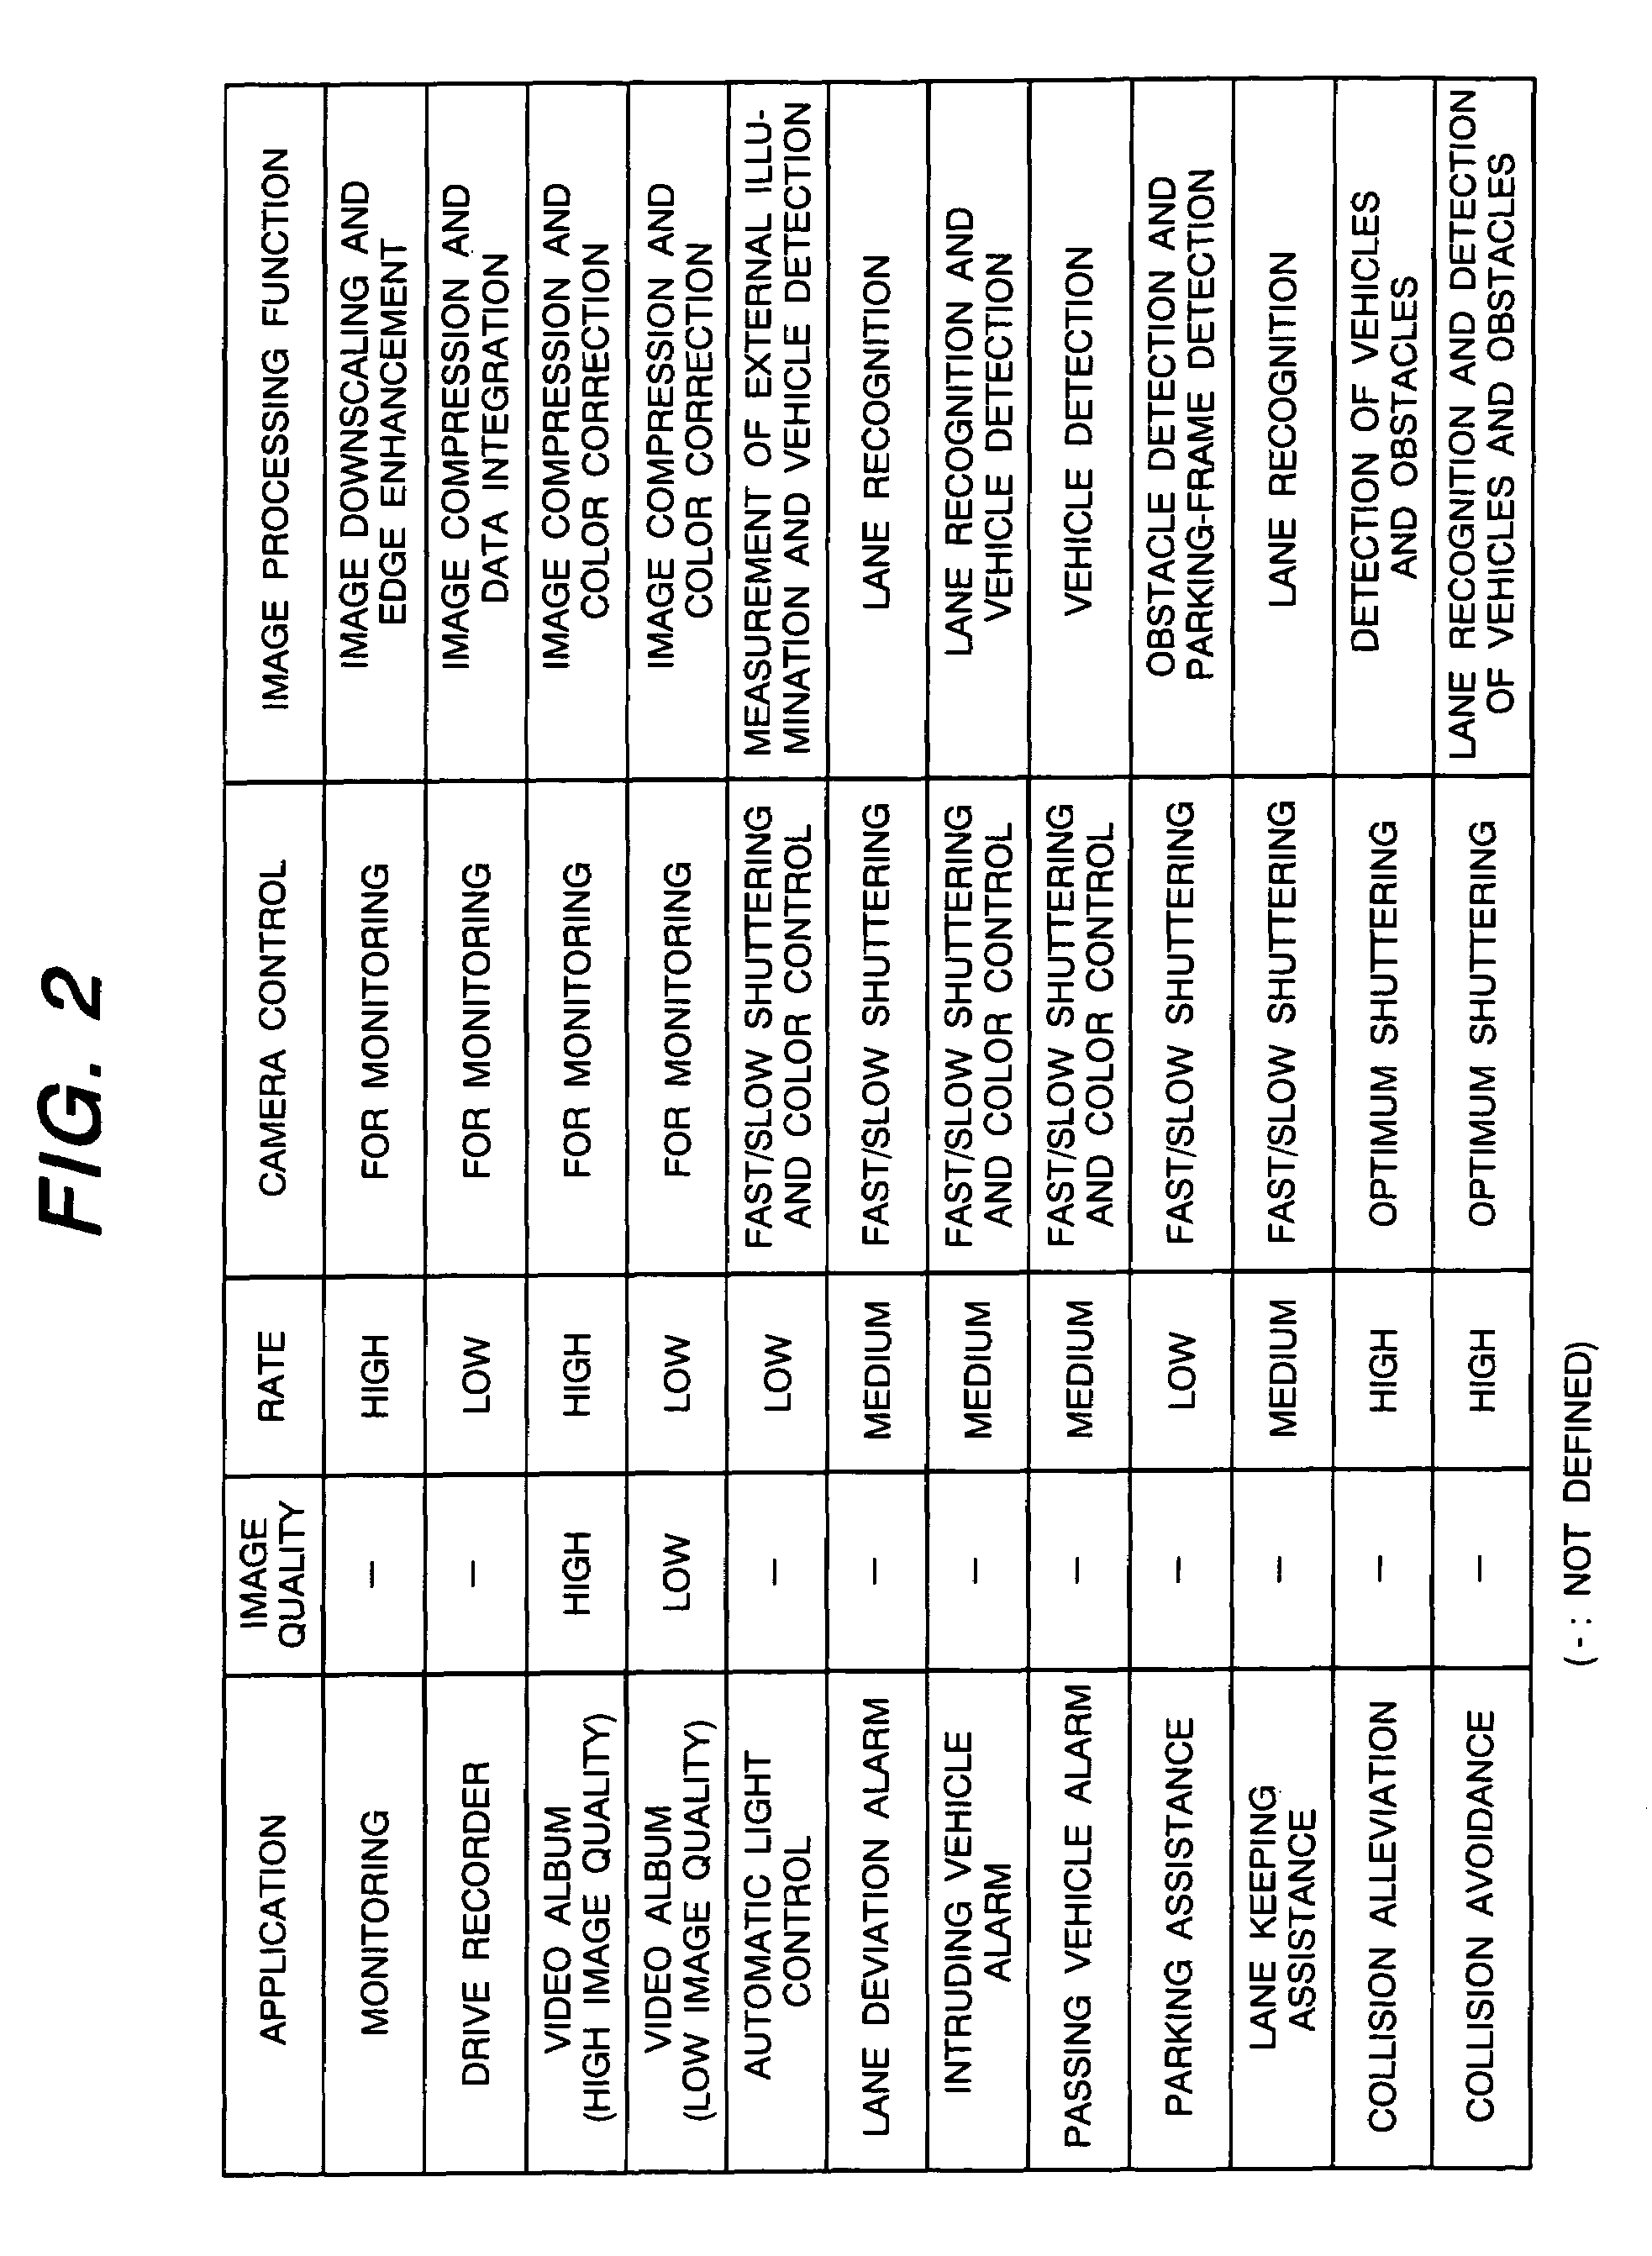 Image-processing camera system and image-processing camera control method